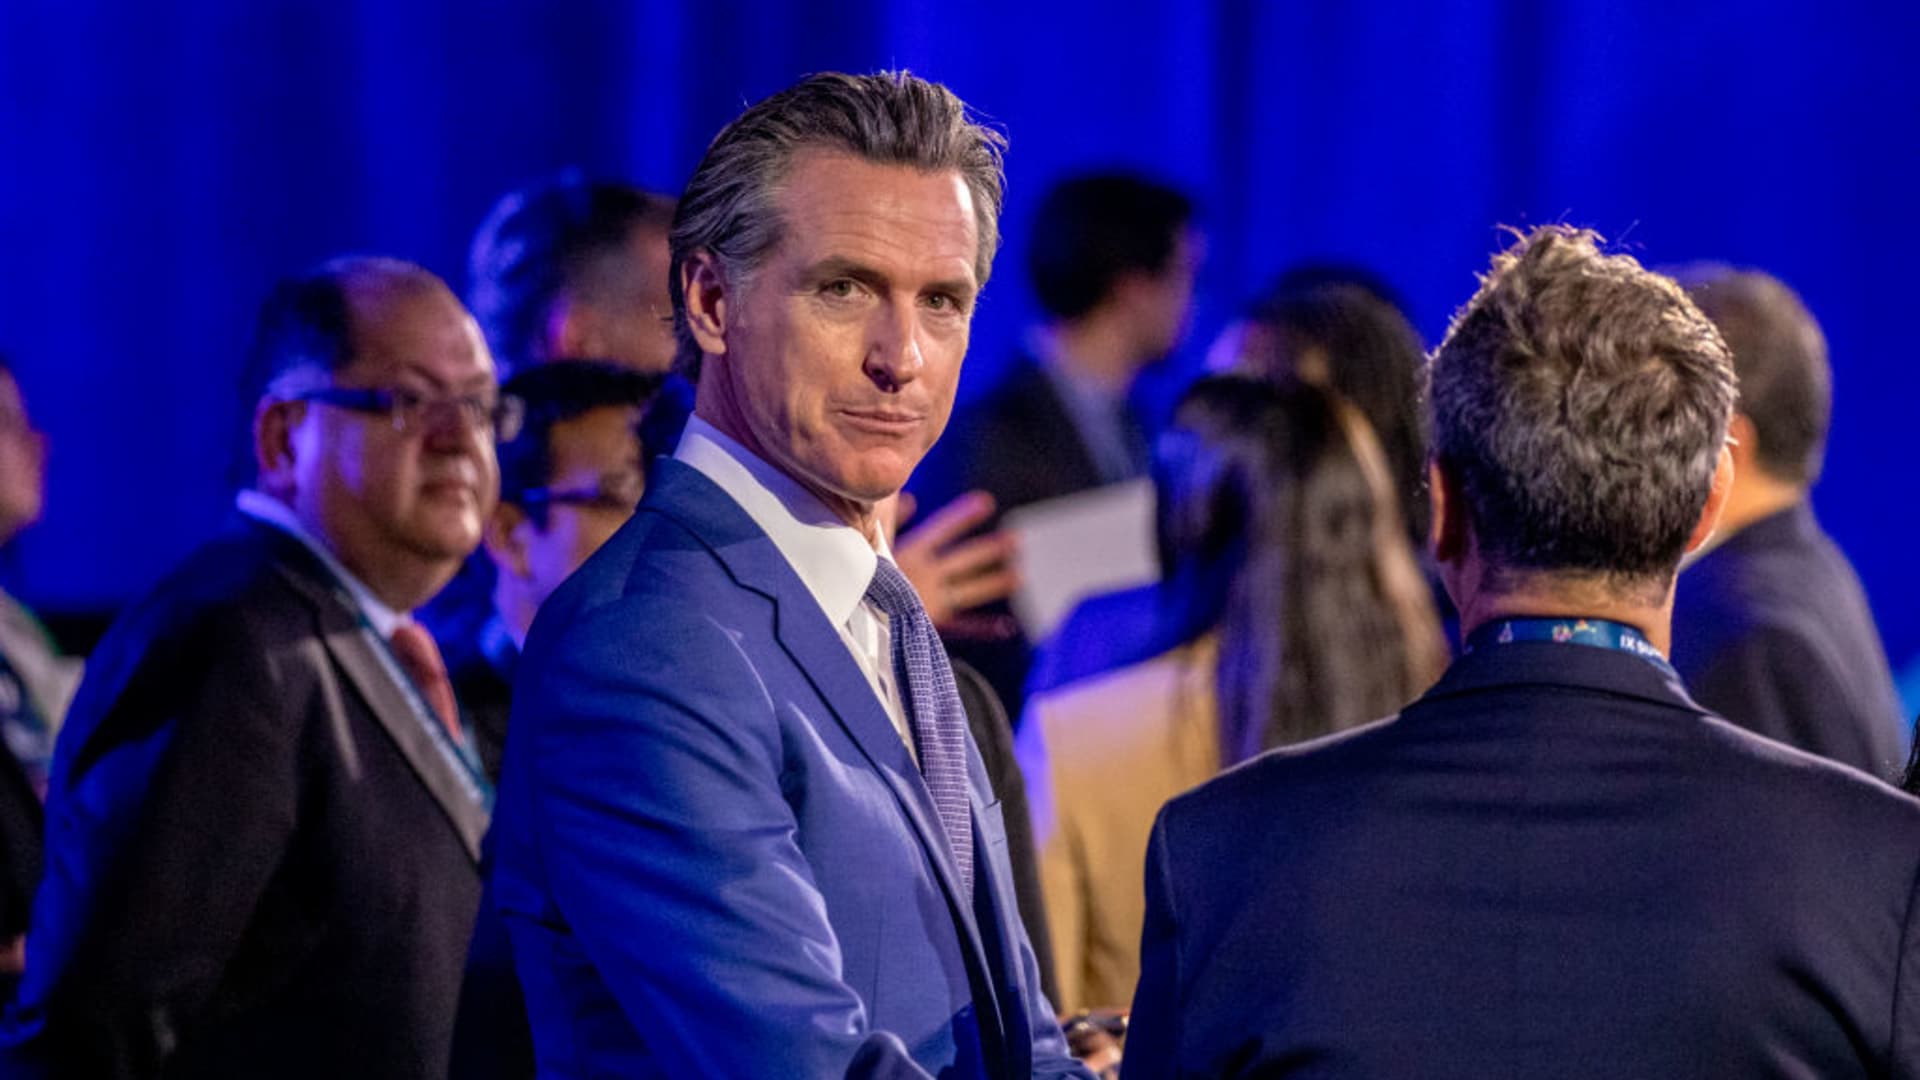 California Gov. Gavin Newsom attending the Summit of the Americas in Los Angeles earlier this June.